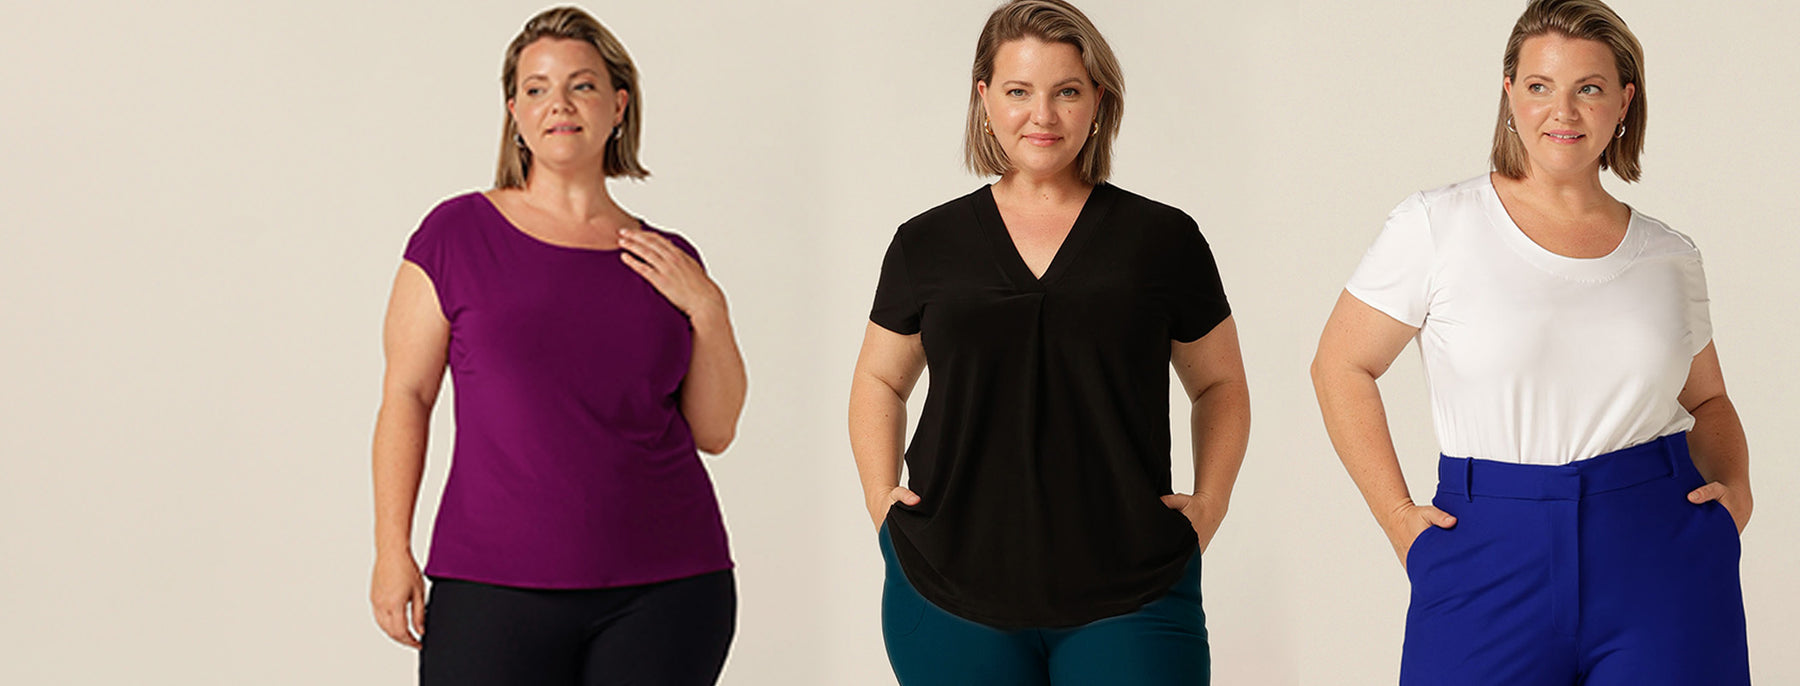 Workwear tops in stretch jersey for petite to plus size women - images shows plus size woman in three work top styles: one top in magenta jersey features cap sleeves and boat neckline. Top two is a V-neck short sleeve top in black jersey and top three is white bamboo jersey with short sleeves and a round neckline 